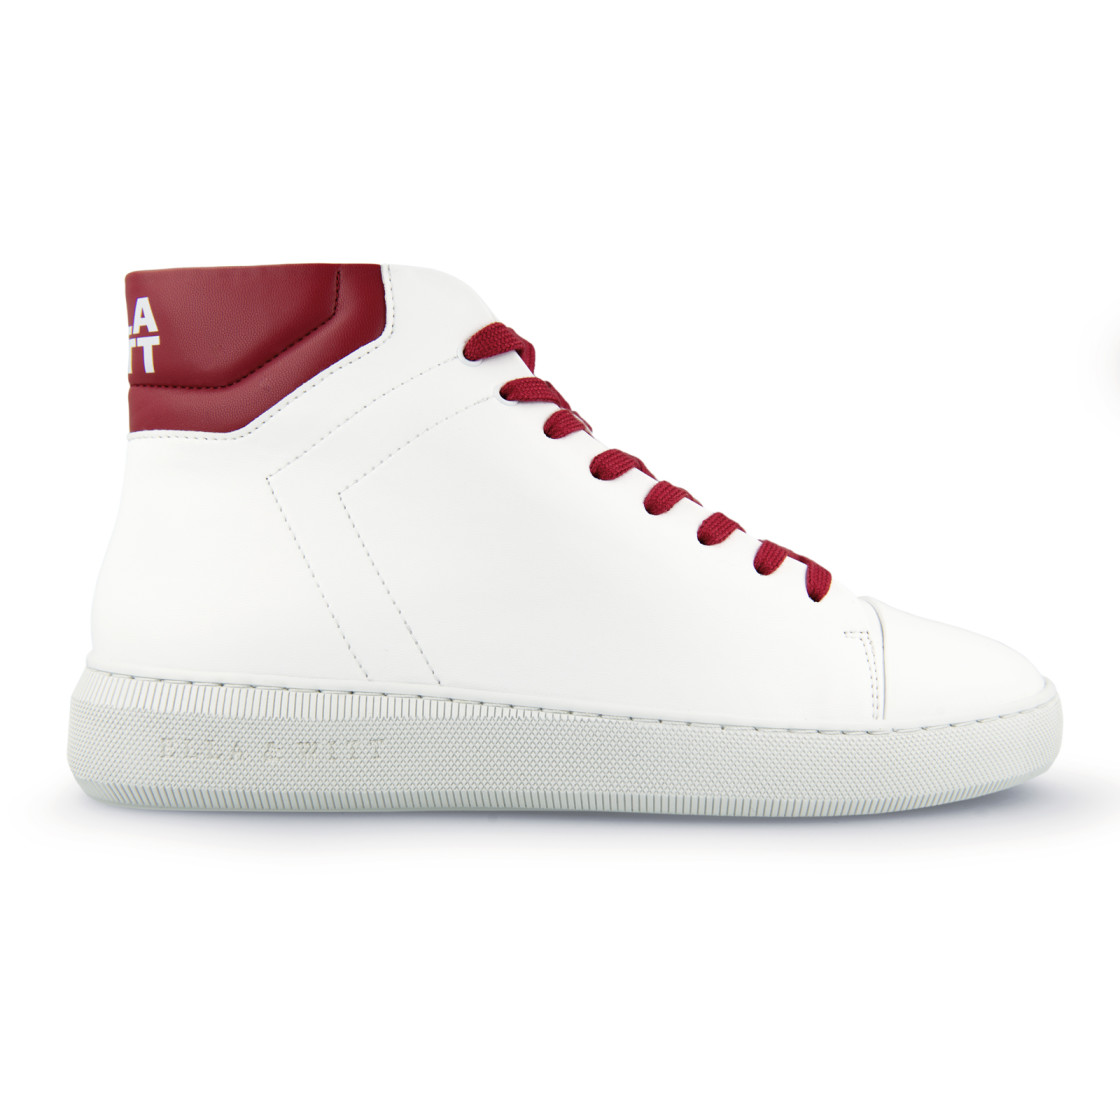 ew 220 200 002 adams white red men Step Up Your Style Game: 19+ of the Best Fair Trade Sneakers Brands